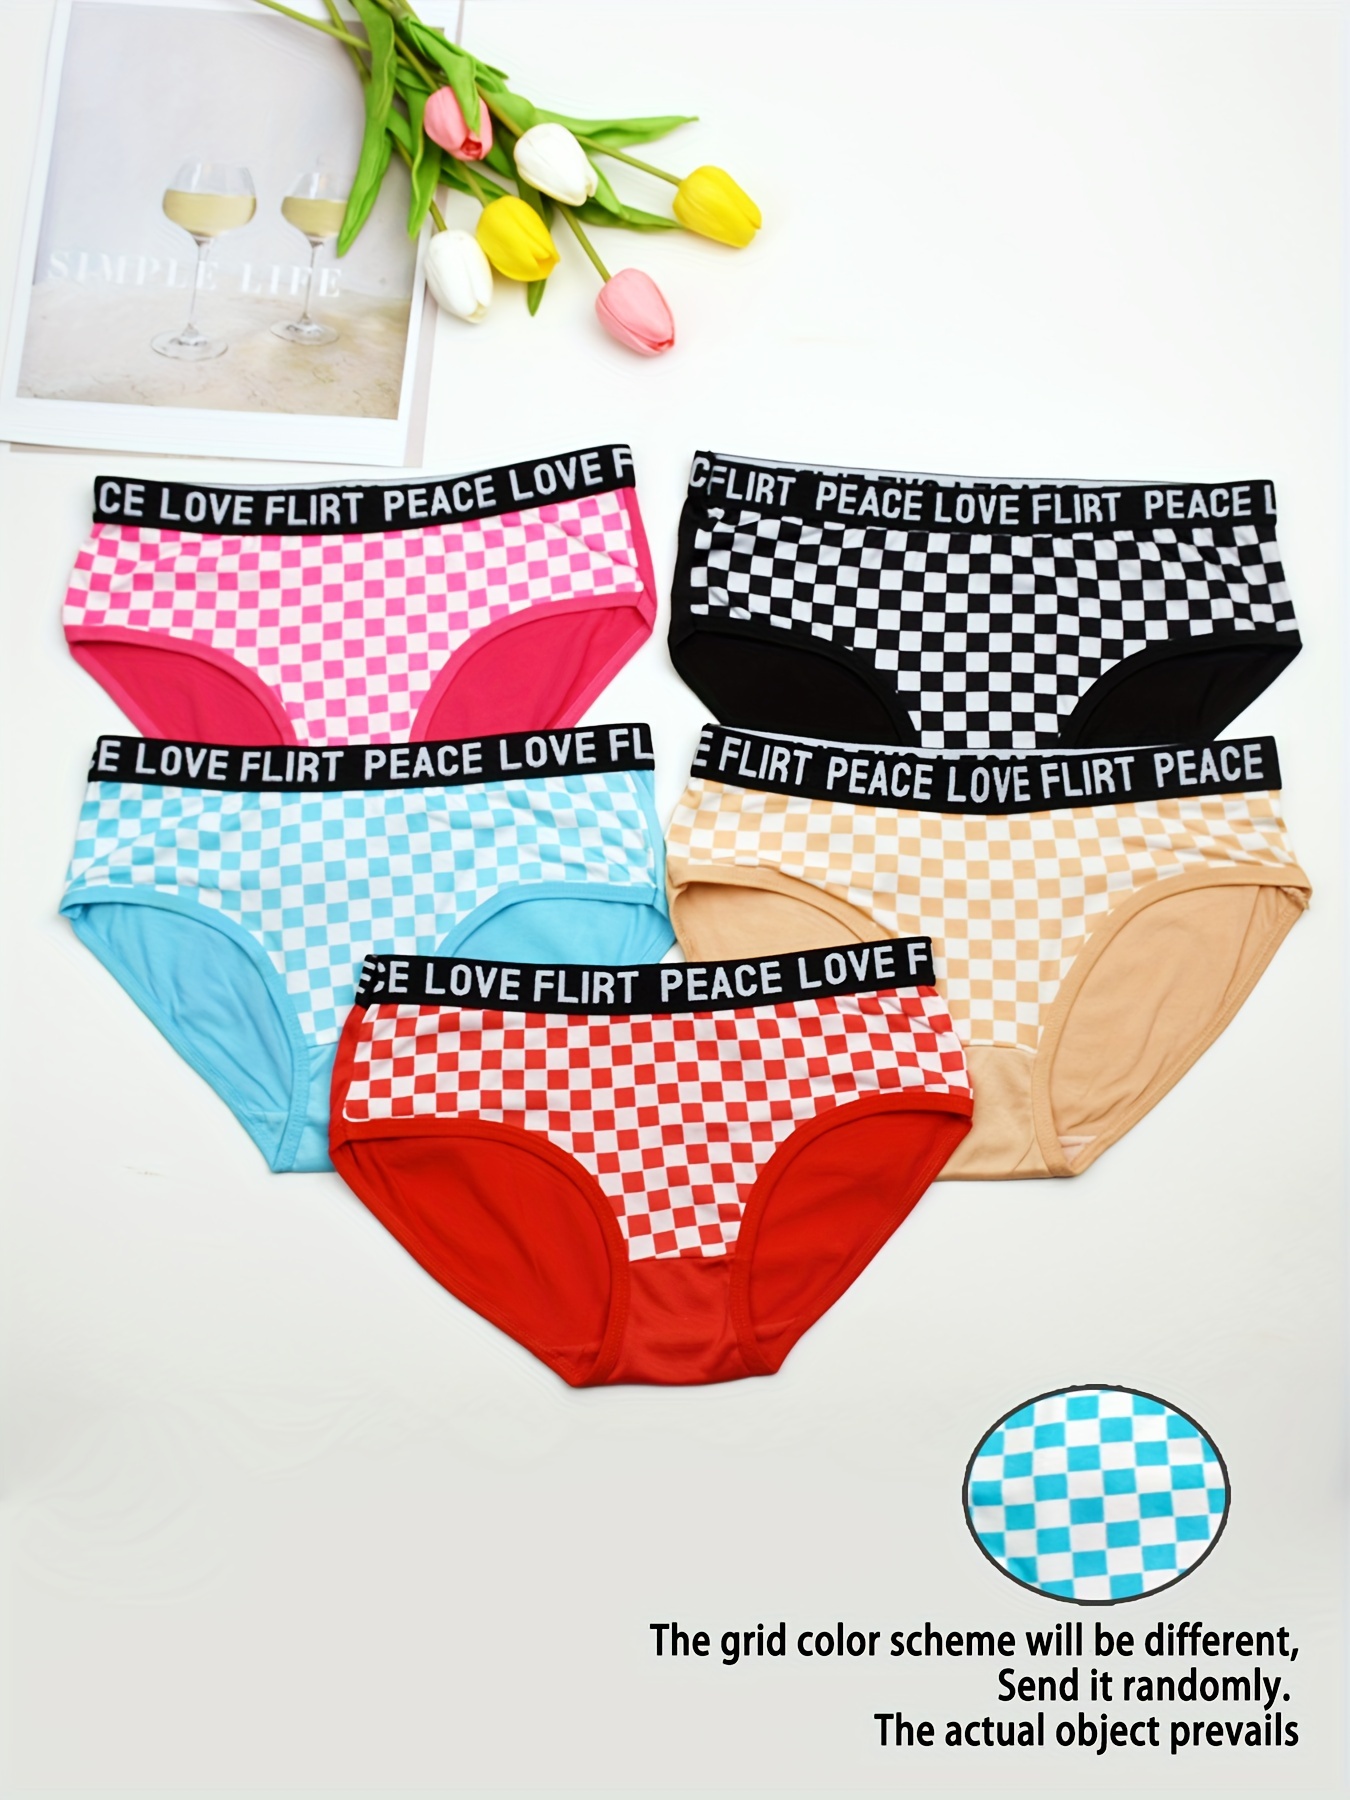 NEW PUBERTY YOUNG girl student Teenagers cotton underwear set with